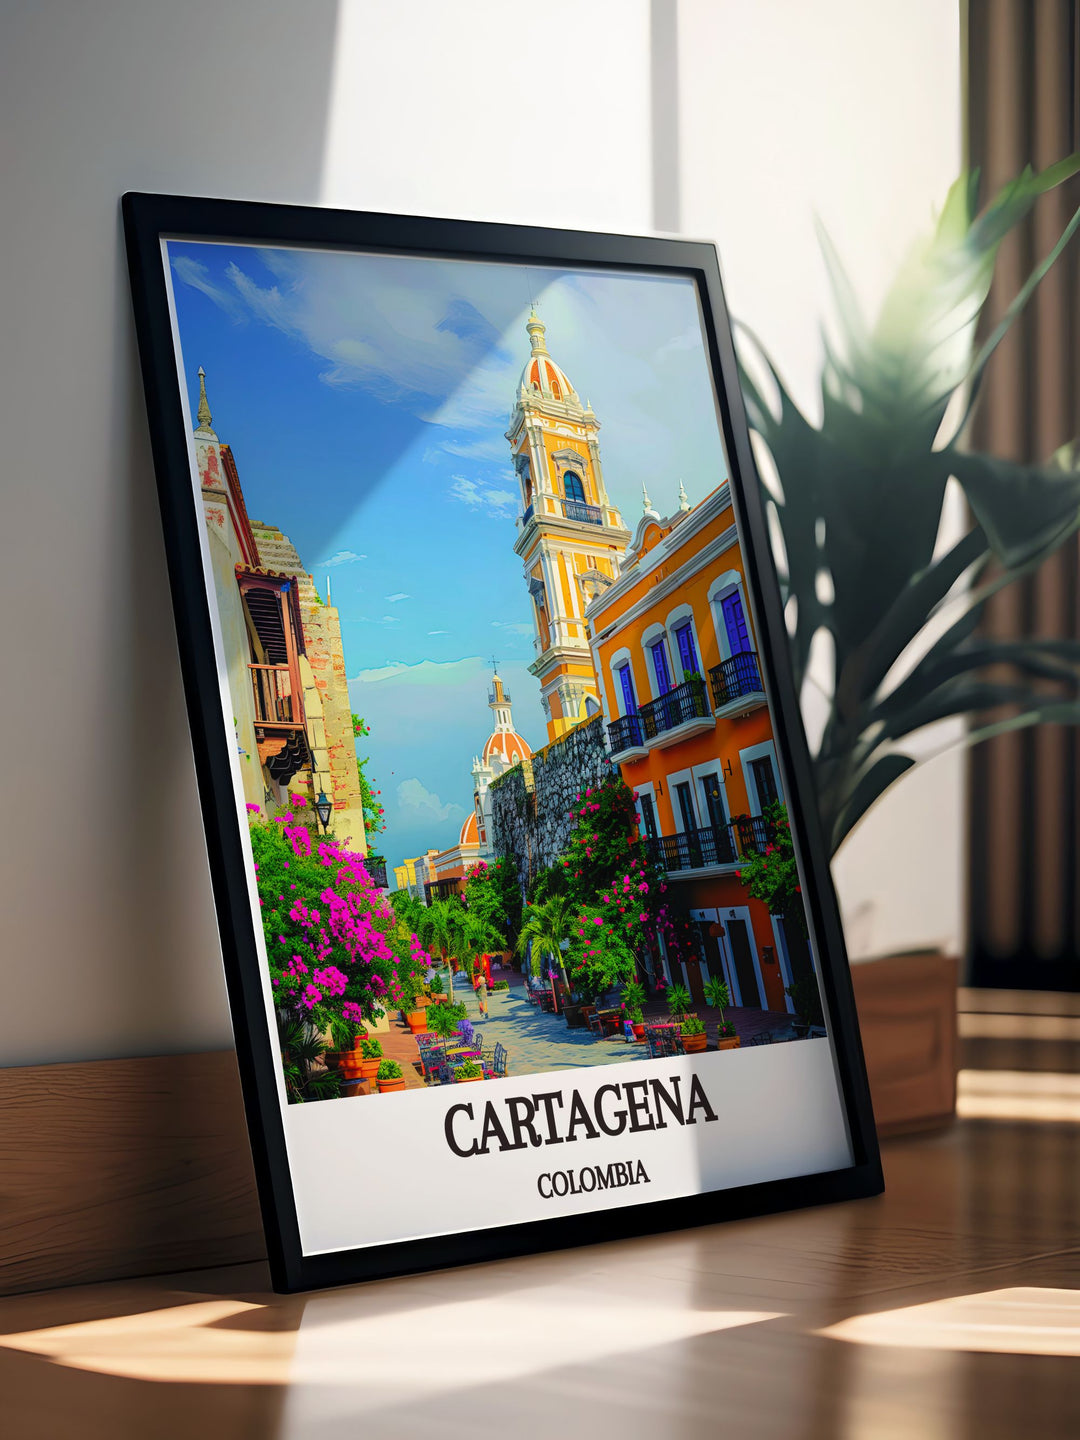 This travel poster beautifully depicts the cultural richness of Cartagenas walled city, with its colorful street scenes and lively local life, making it an ideal piece for urban enthusiasts and collectors. Bring the spirit of Cartagena into your home with this exquisite print.